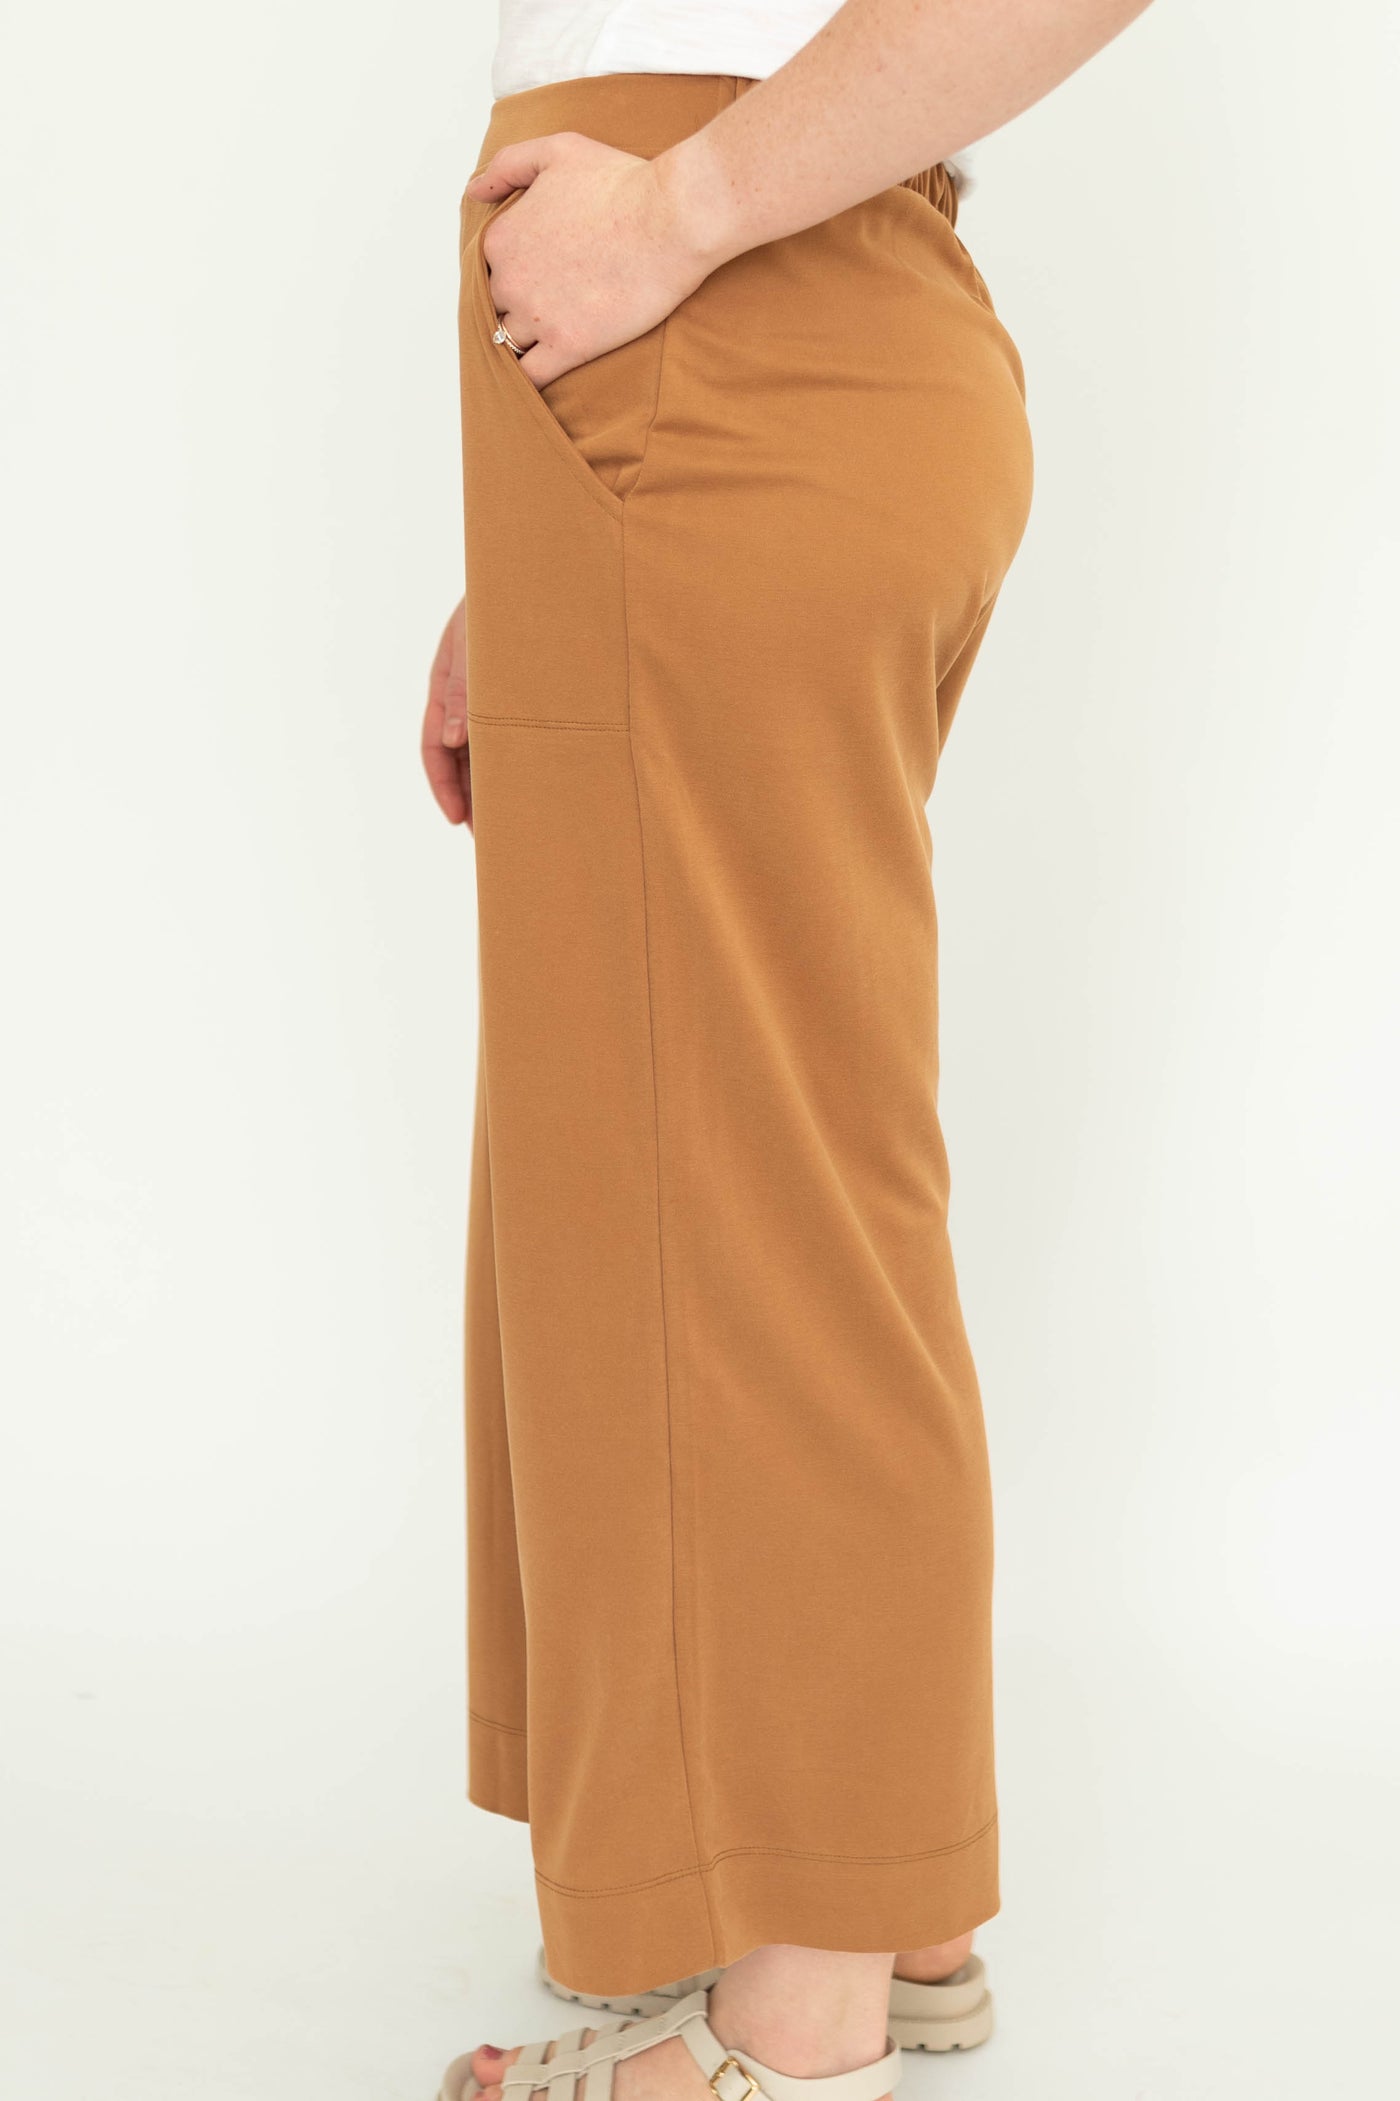 Side view of a mocha colored wide leg knit pants.